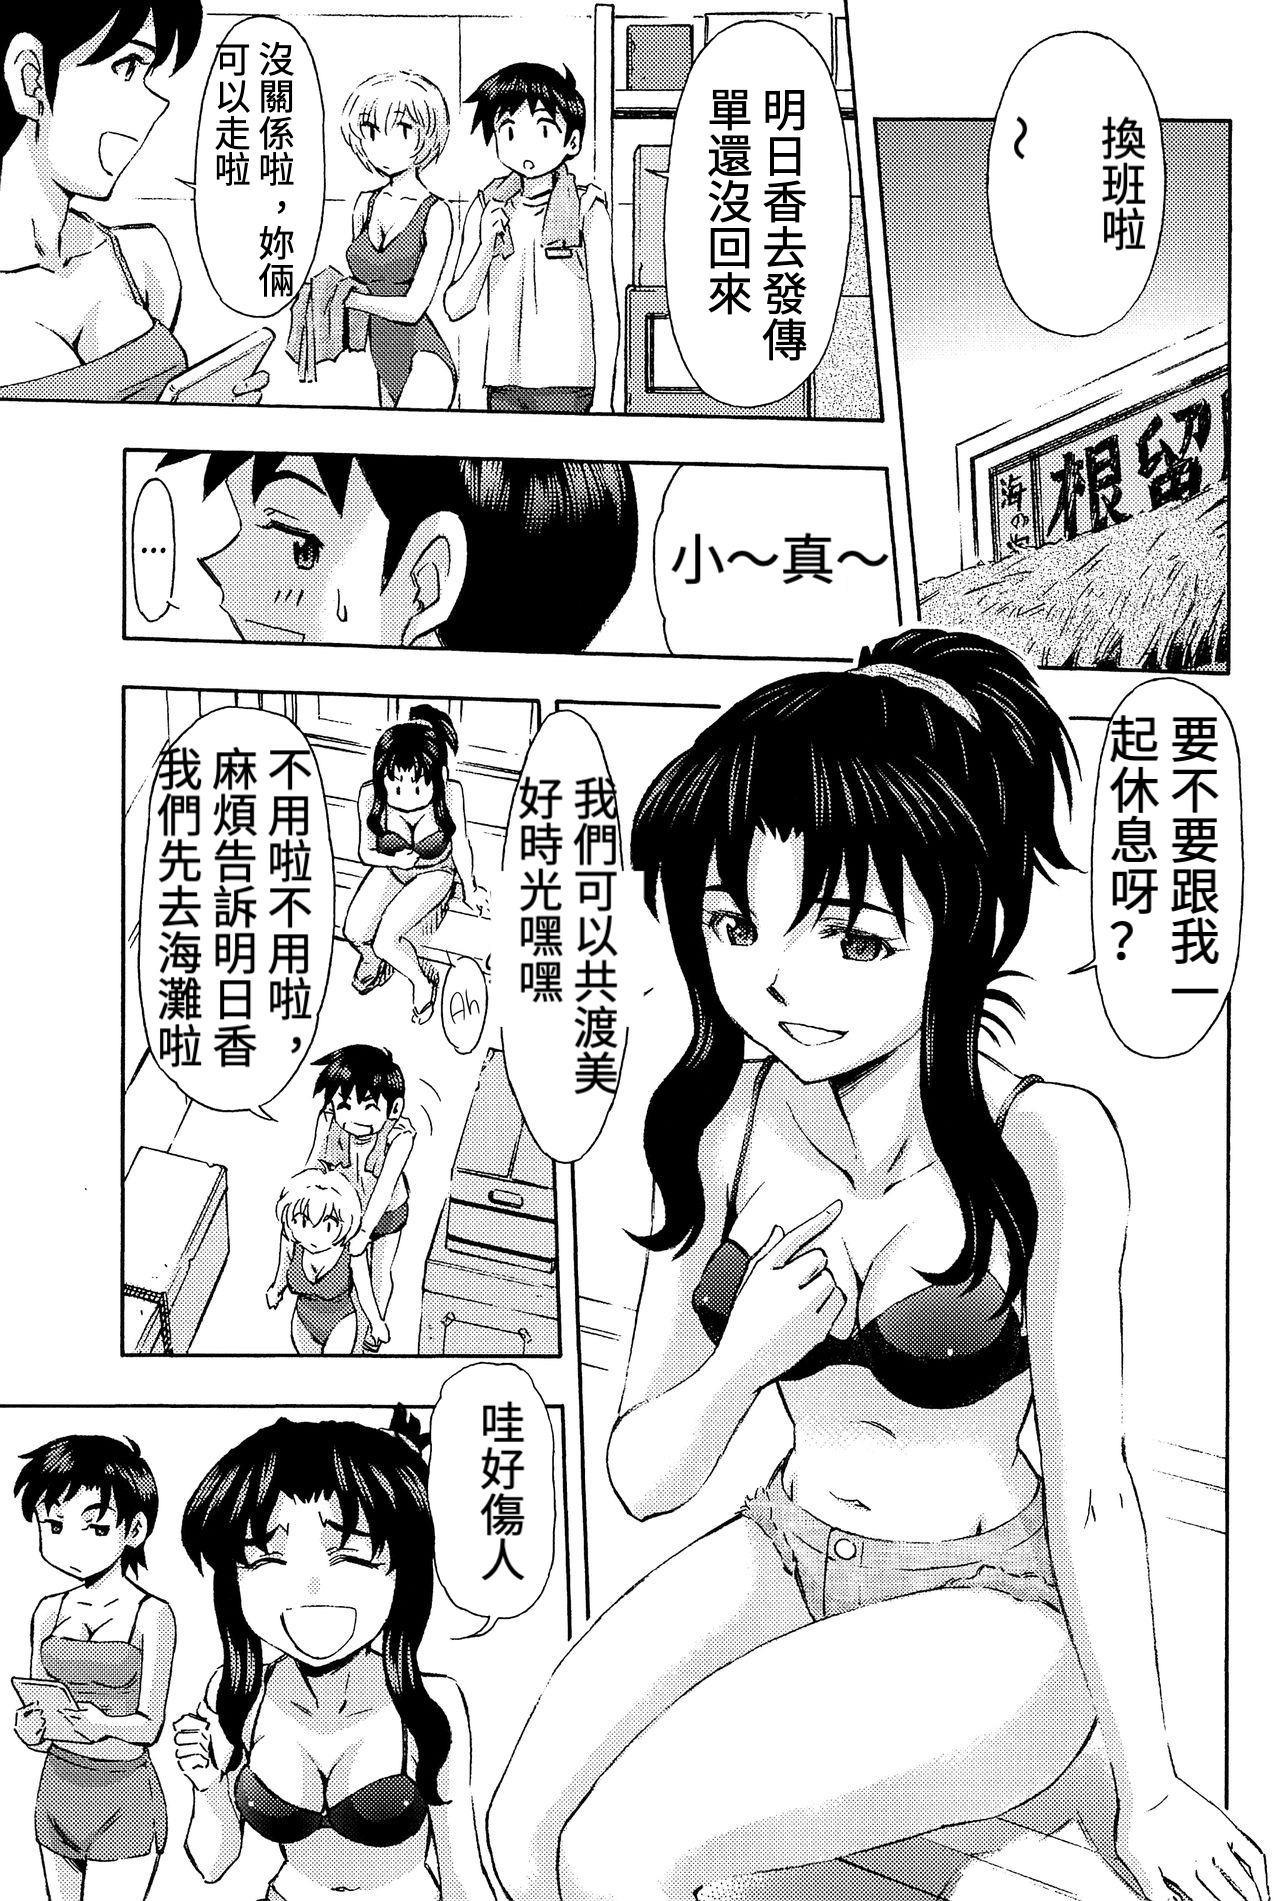 Fuck Pussy 3-nin Musume to Umi no Ie - Neon genesis evangelion Small Tits - Page 6